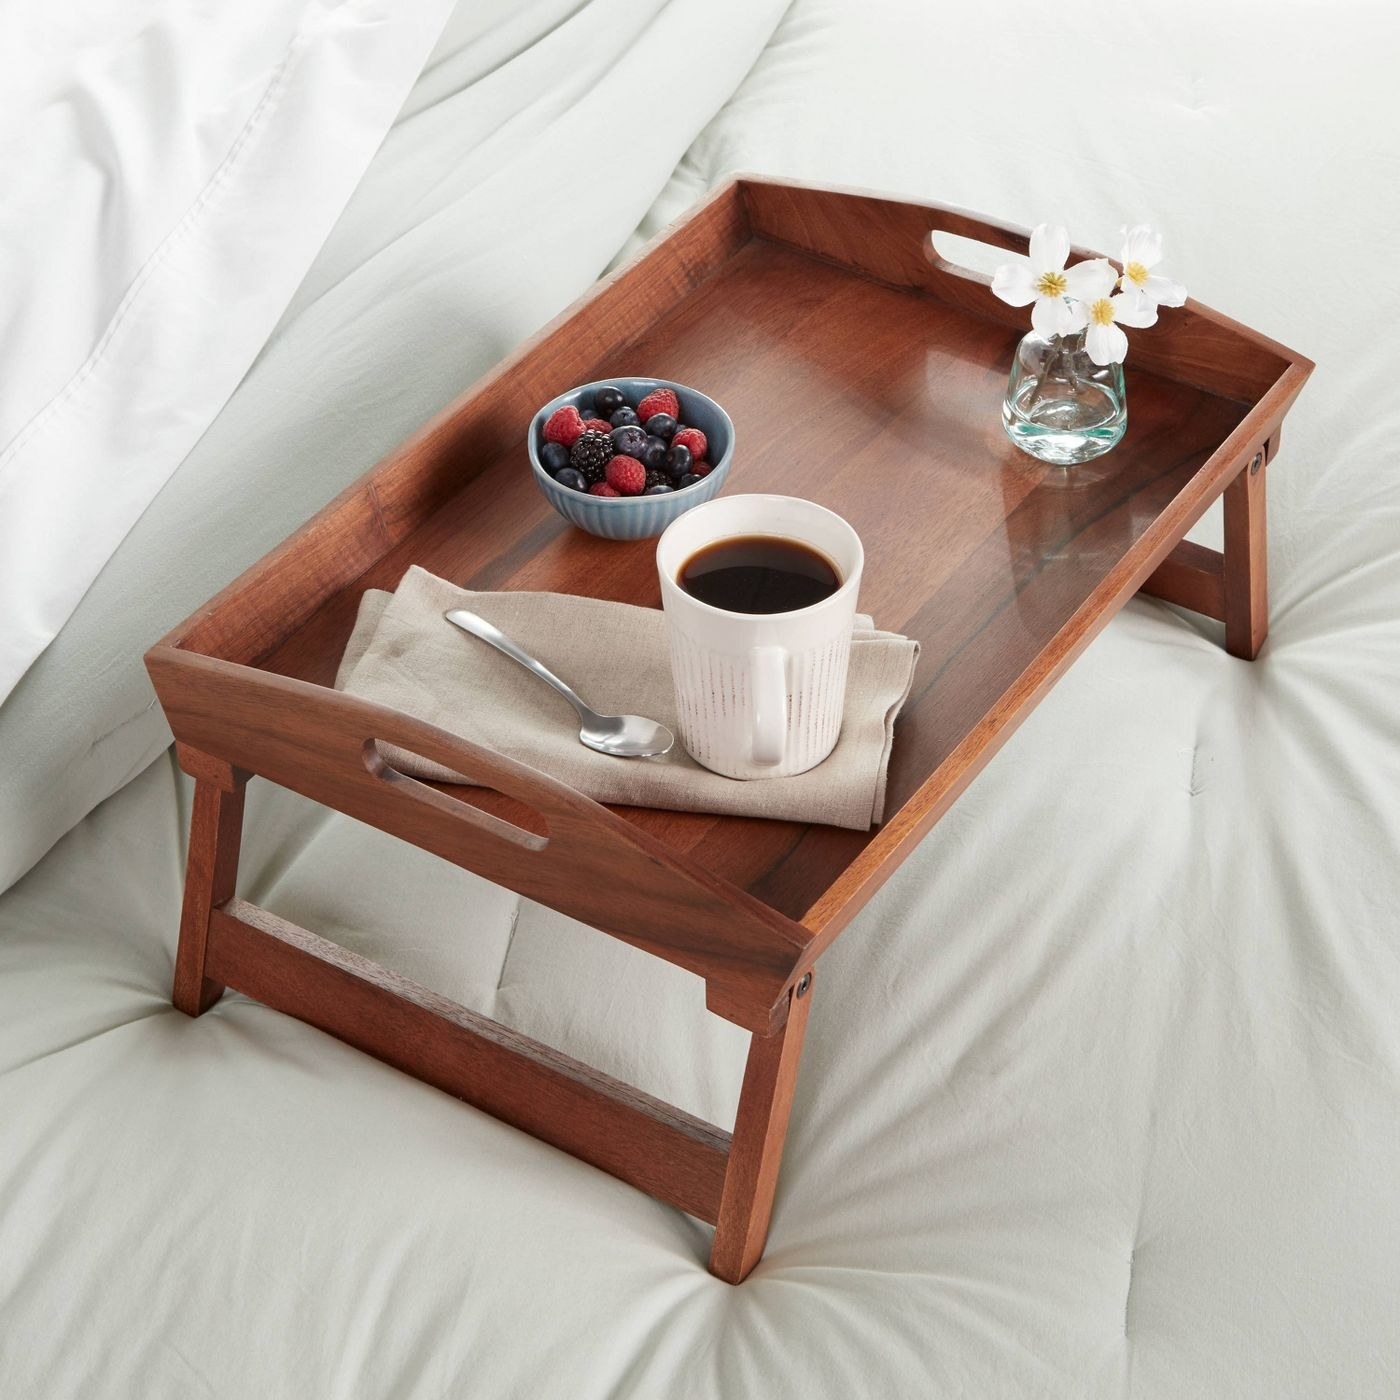 A wood bed tray